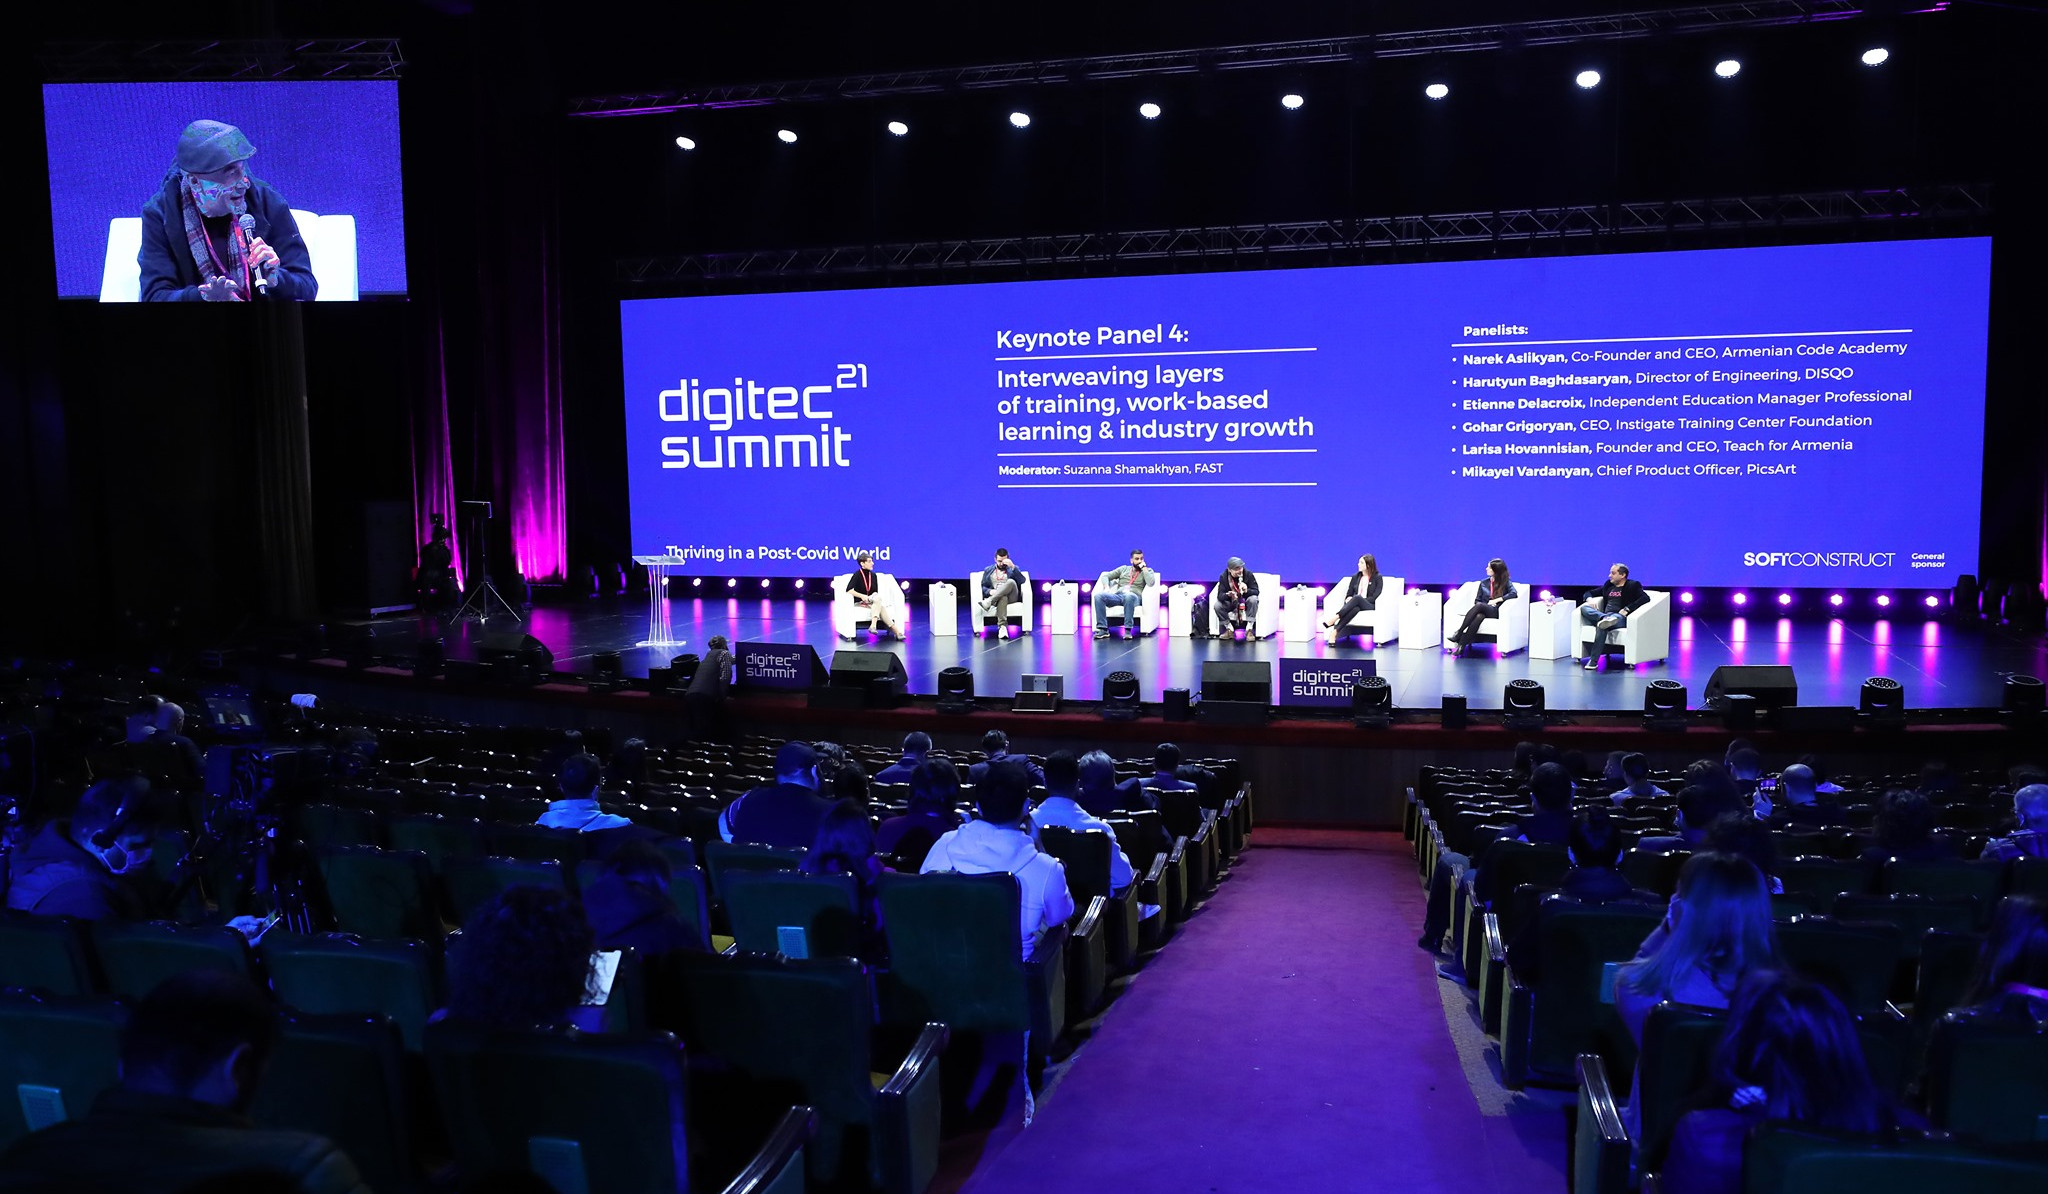 DigiTech Summit to have more than 800 participants